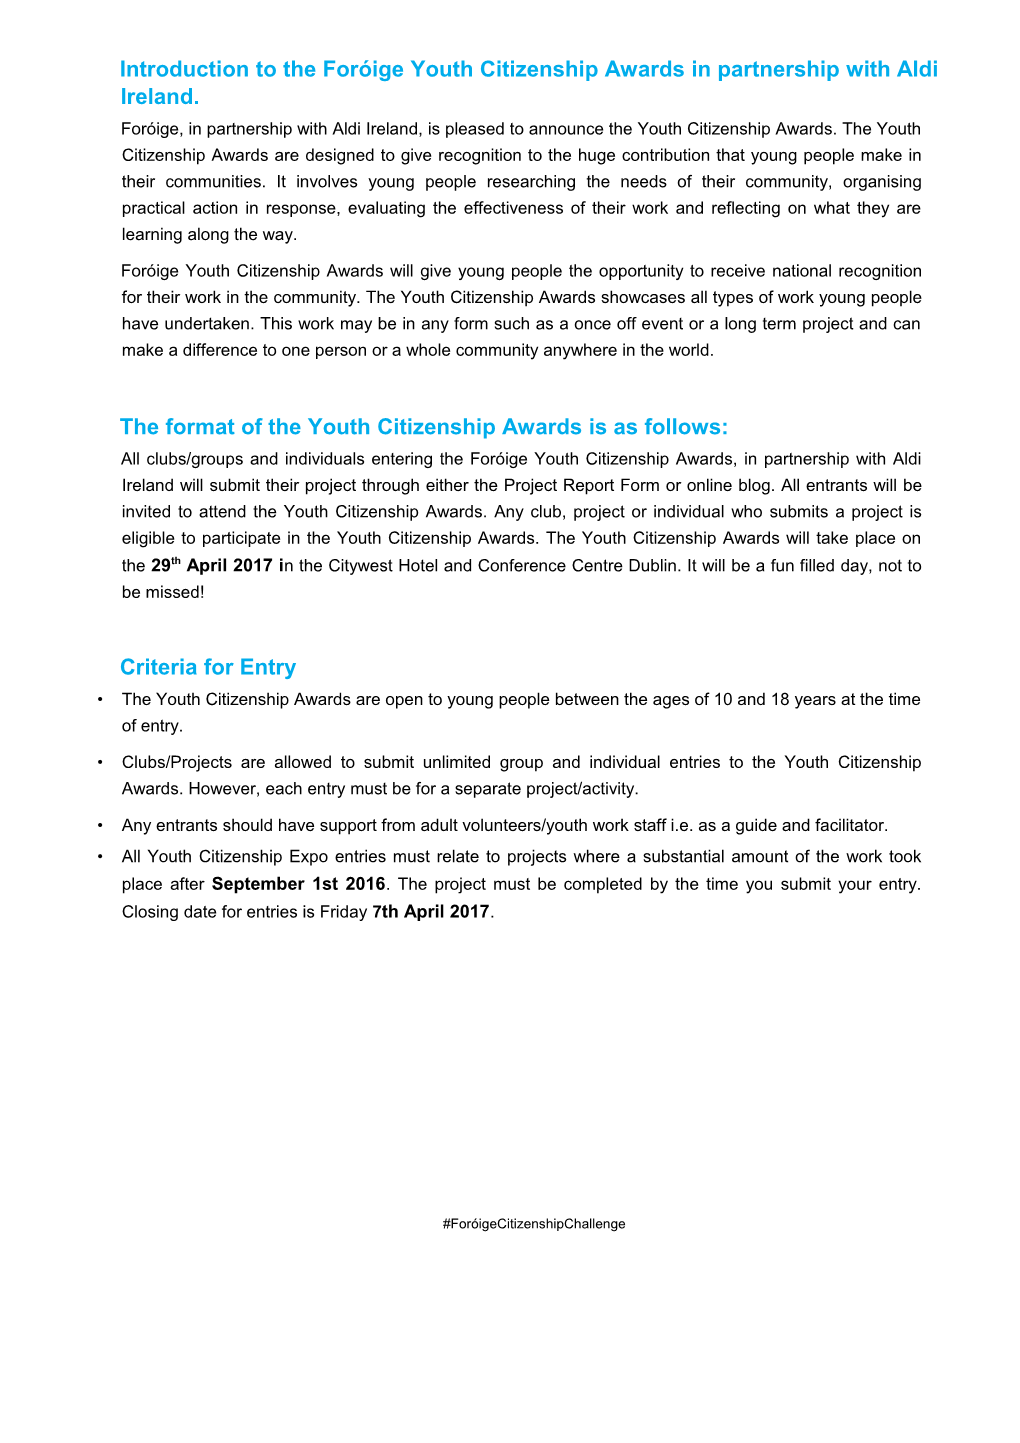 Introduction to the Foróige Youth Citizenship Awards in Partnership with Aldi Ireland